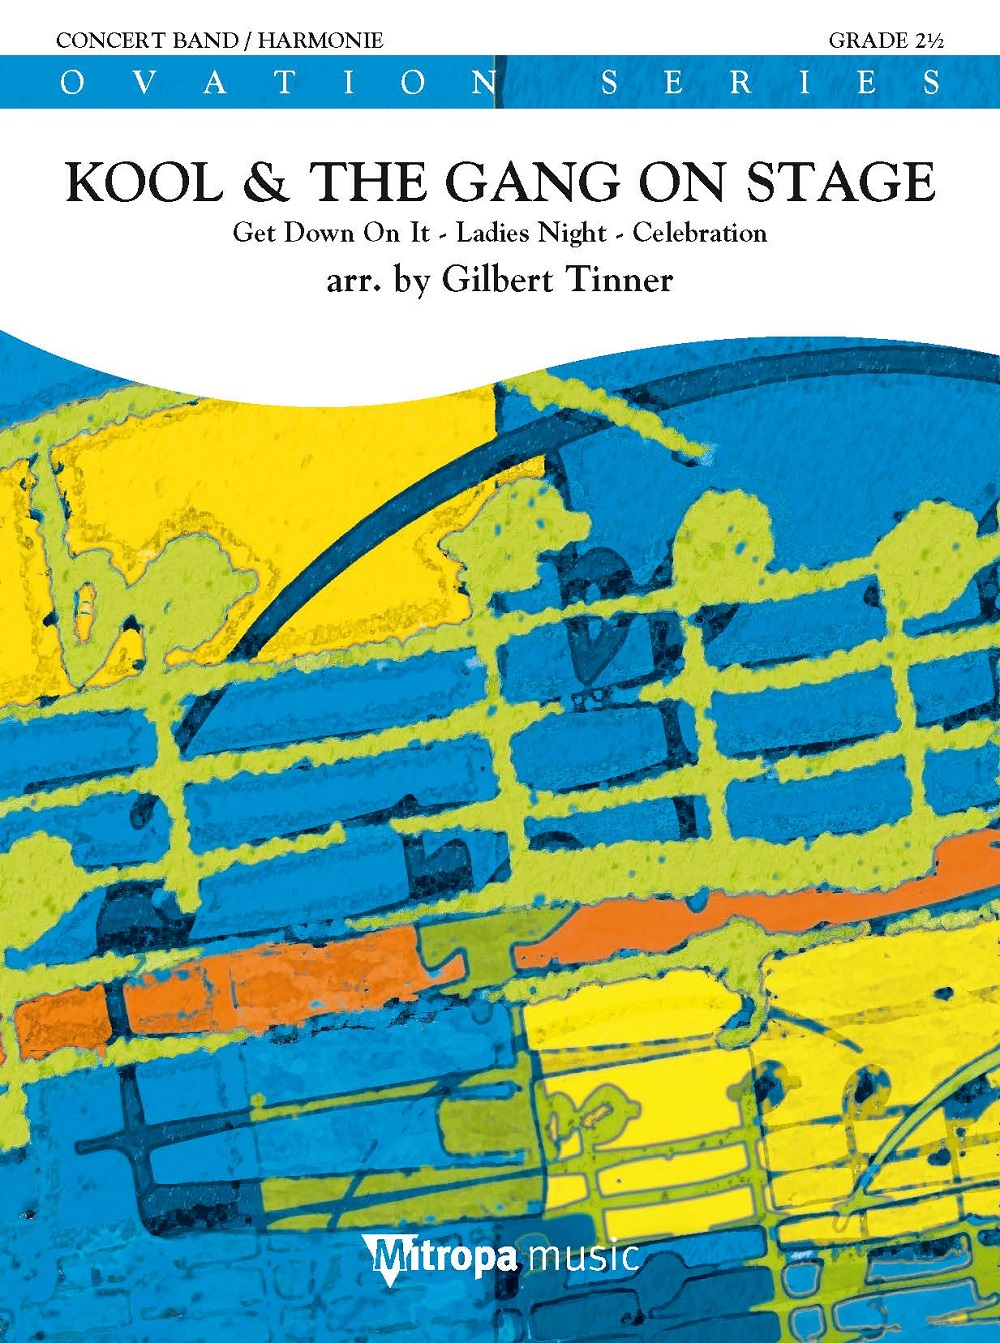 Kool & the Gang on Stage: Concert Band: Score & Parts